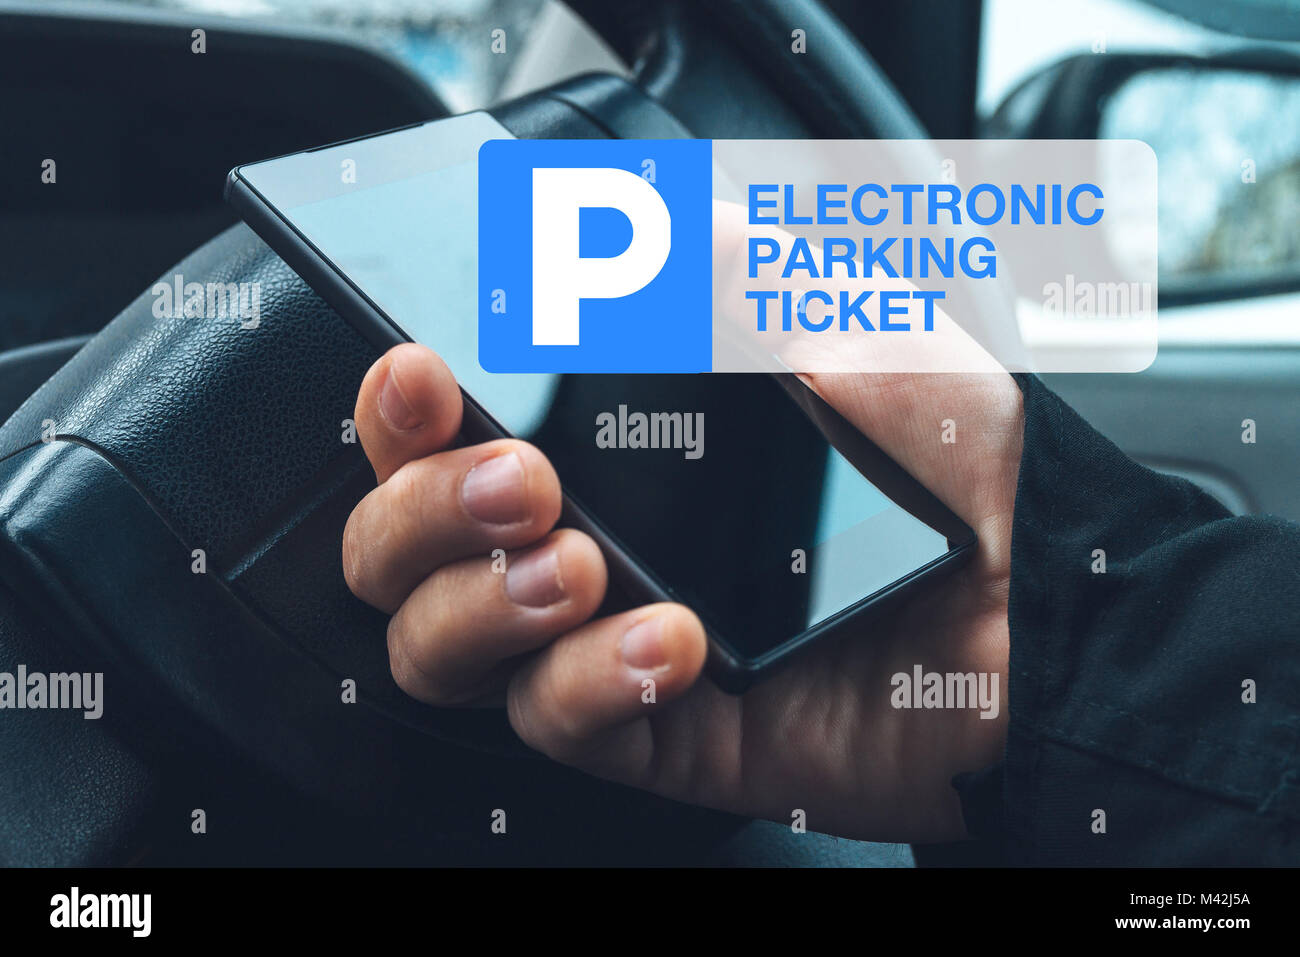 Electronic car parking ticket purchase with mobile smart phone app Stock Photo